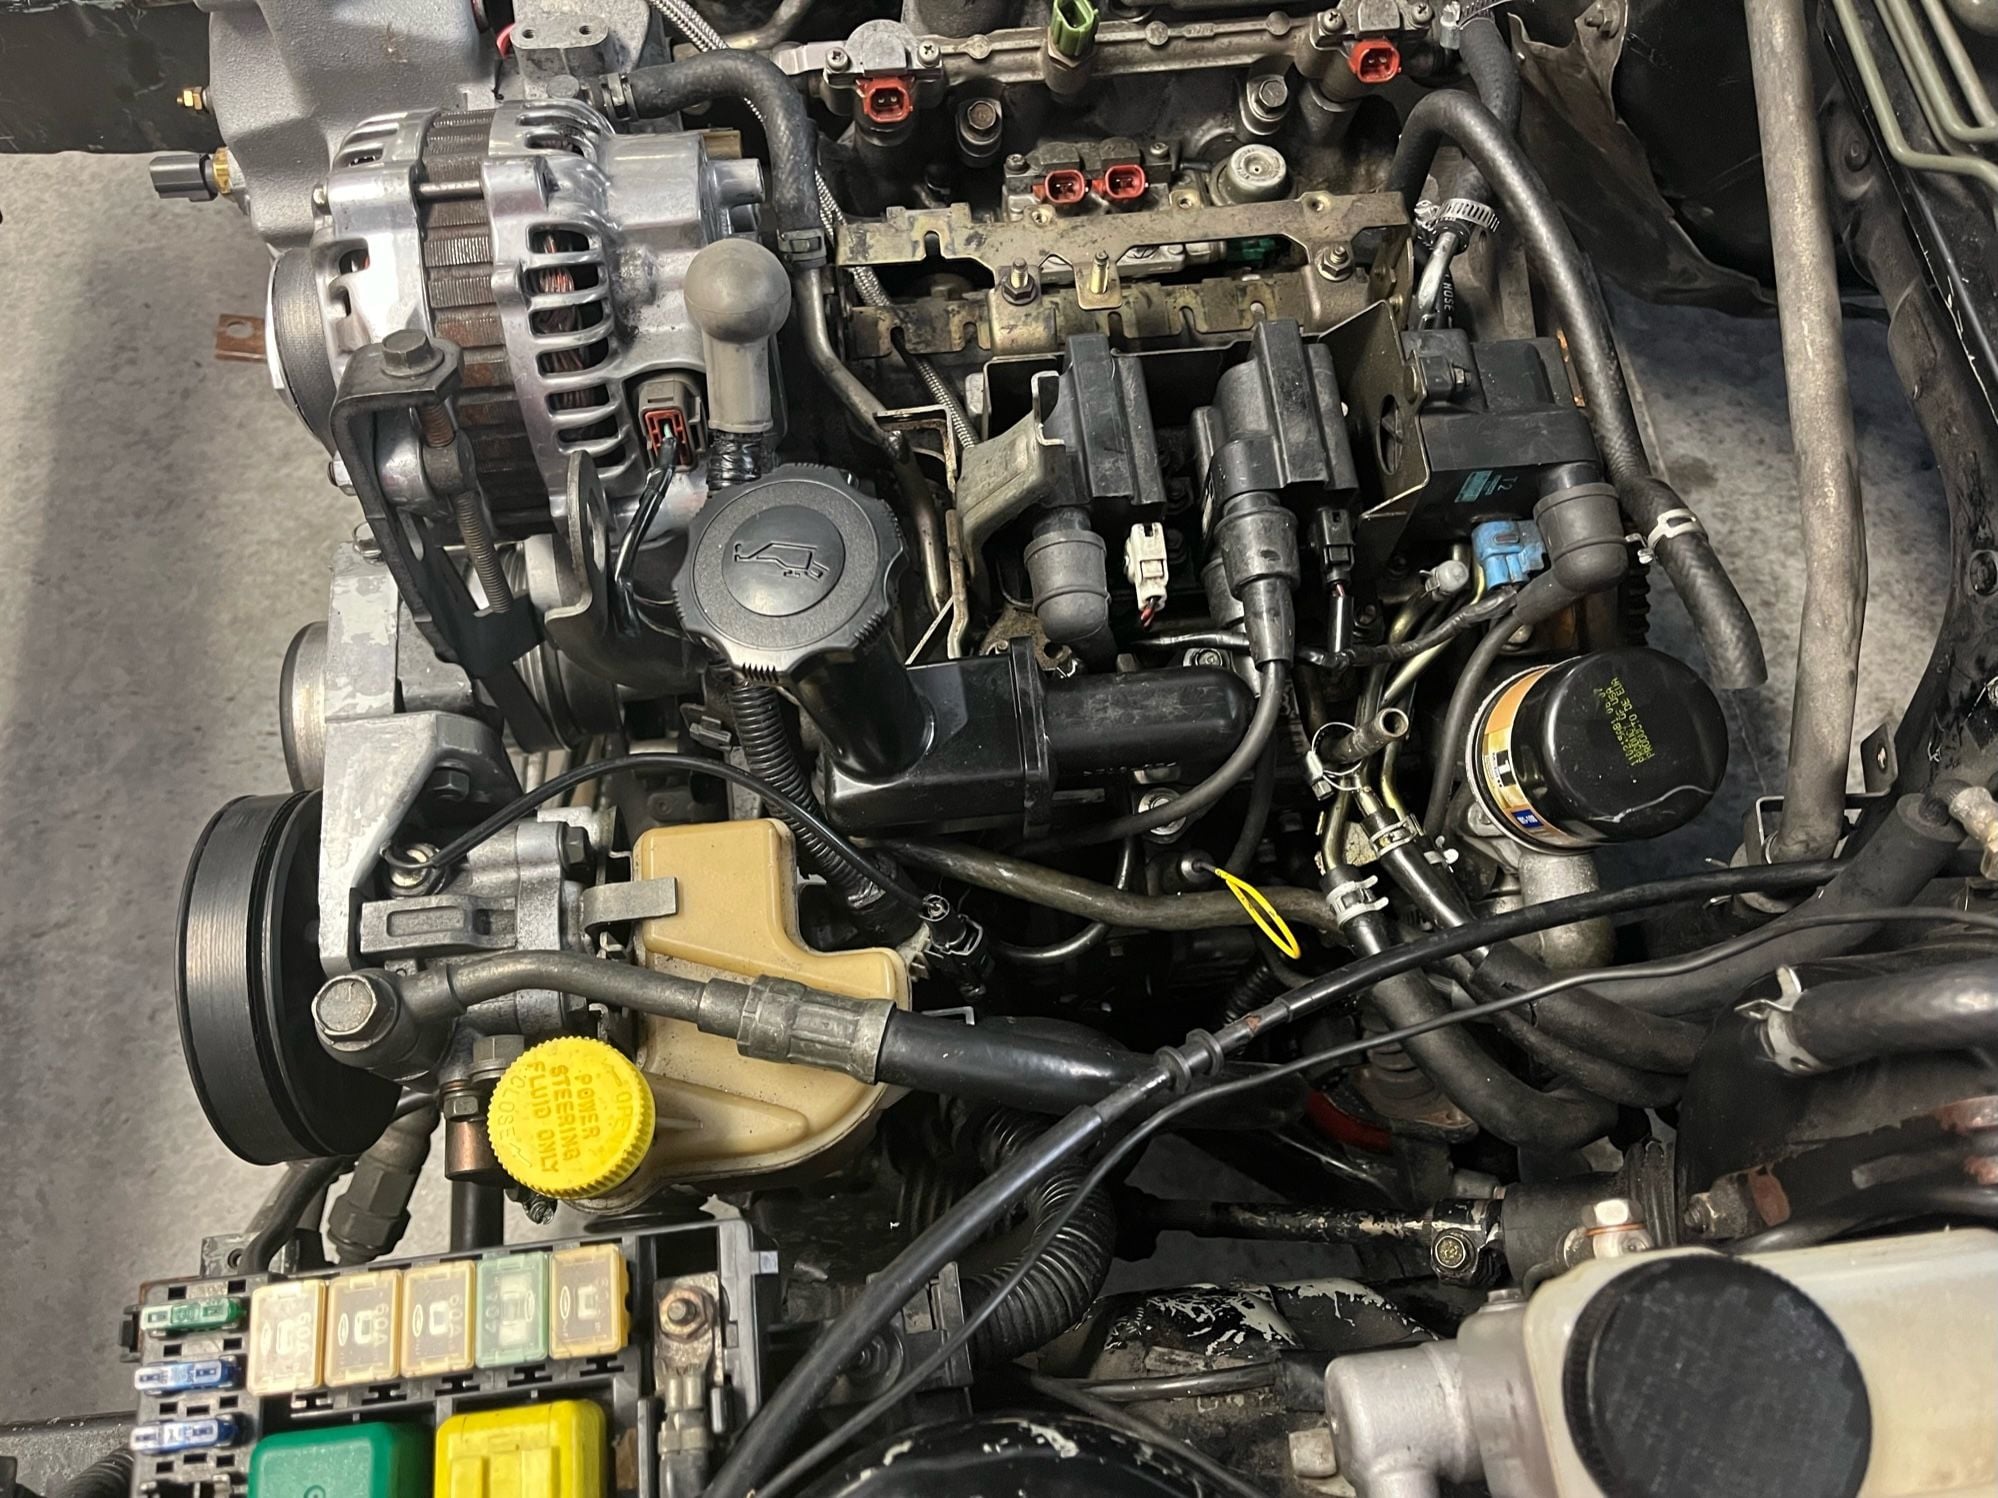 Engine - Complete - FD Single Turbo engine/trans part out going LSX - Used - 1992 to 2002 Mazda RX-7 - Charleston, SC 29403, United States